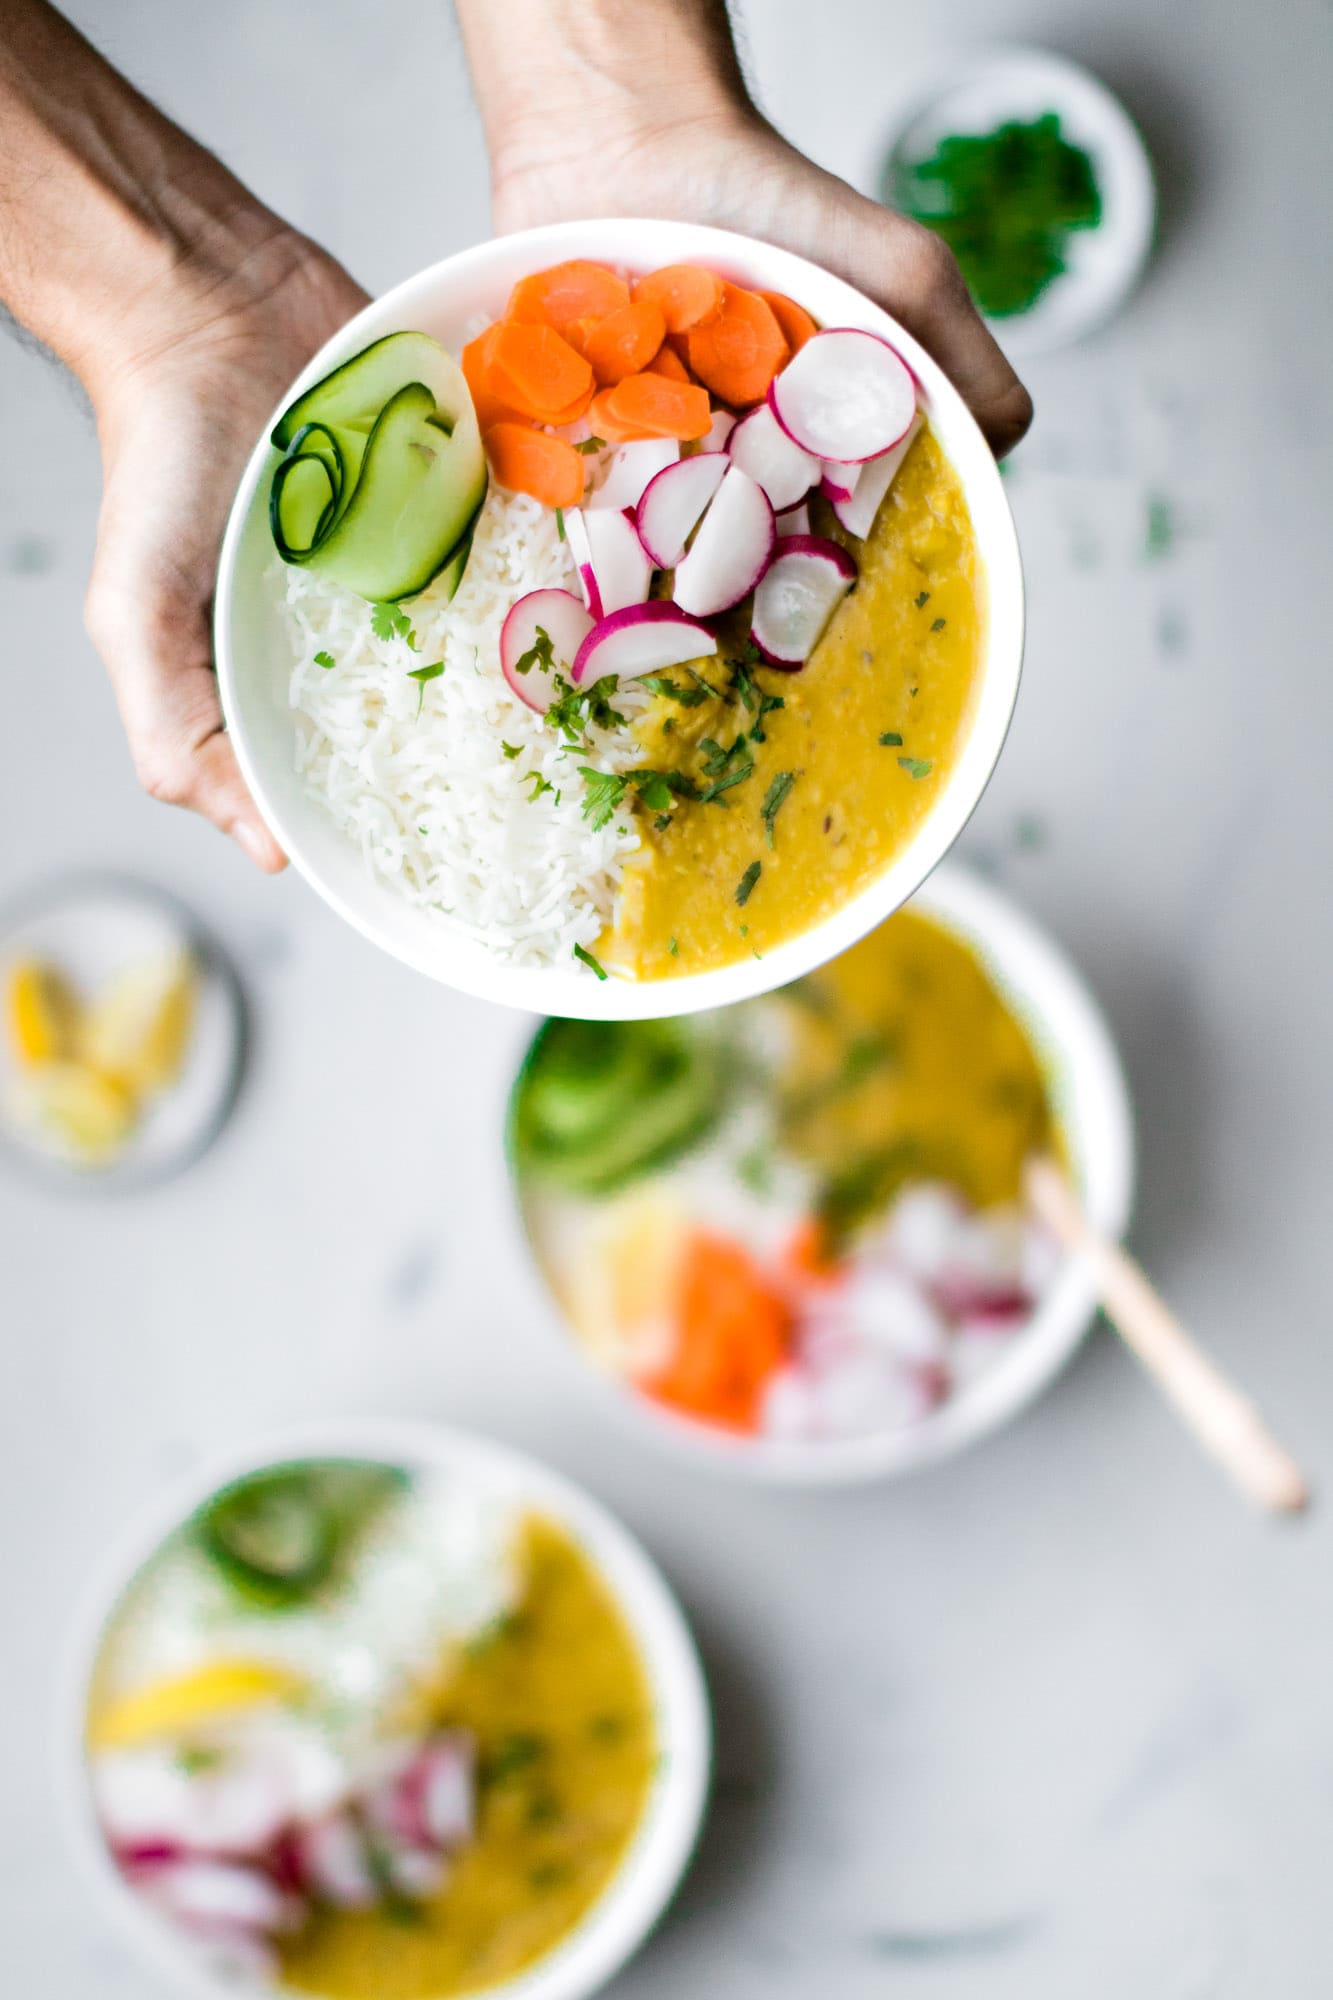 Holding a white bowl of Instant Pot Red Lentils, Basmati rice, ribbon of cucumber, sliced carrots and radishes.